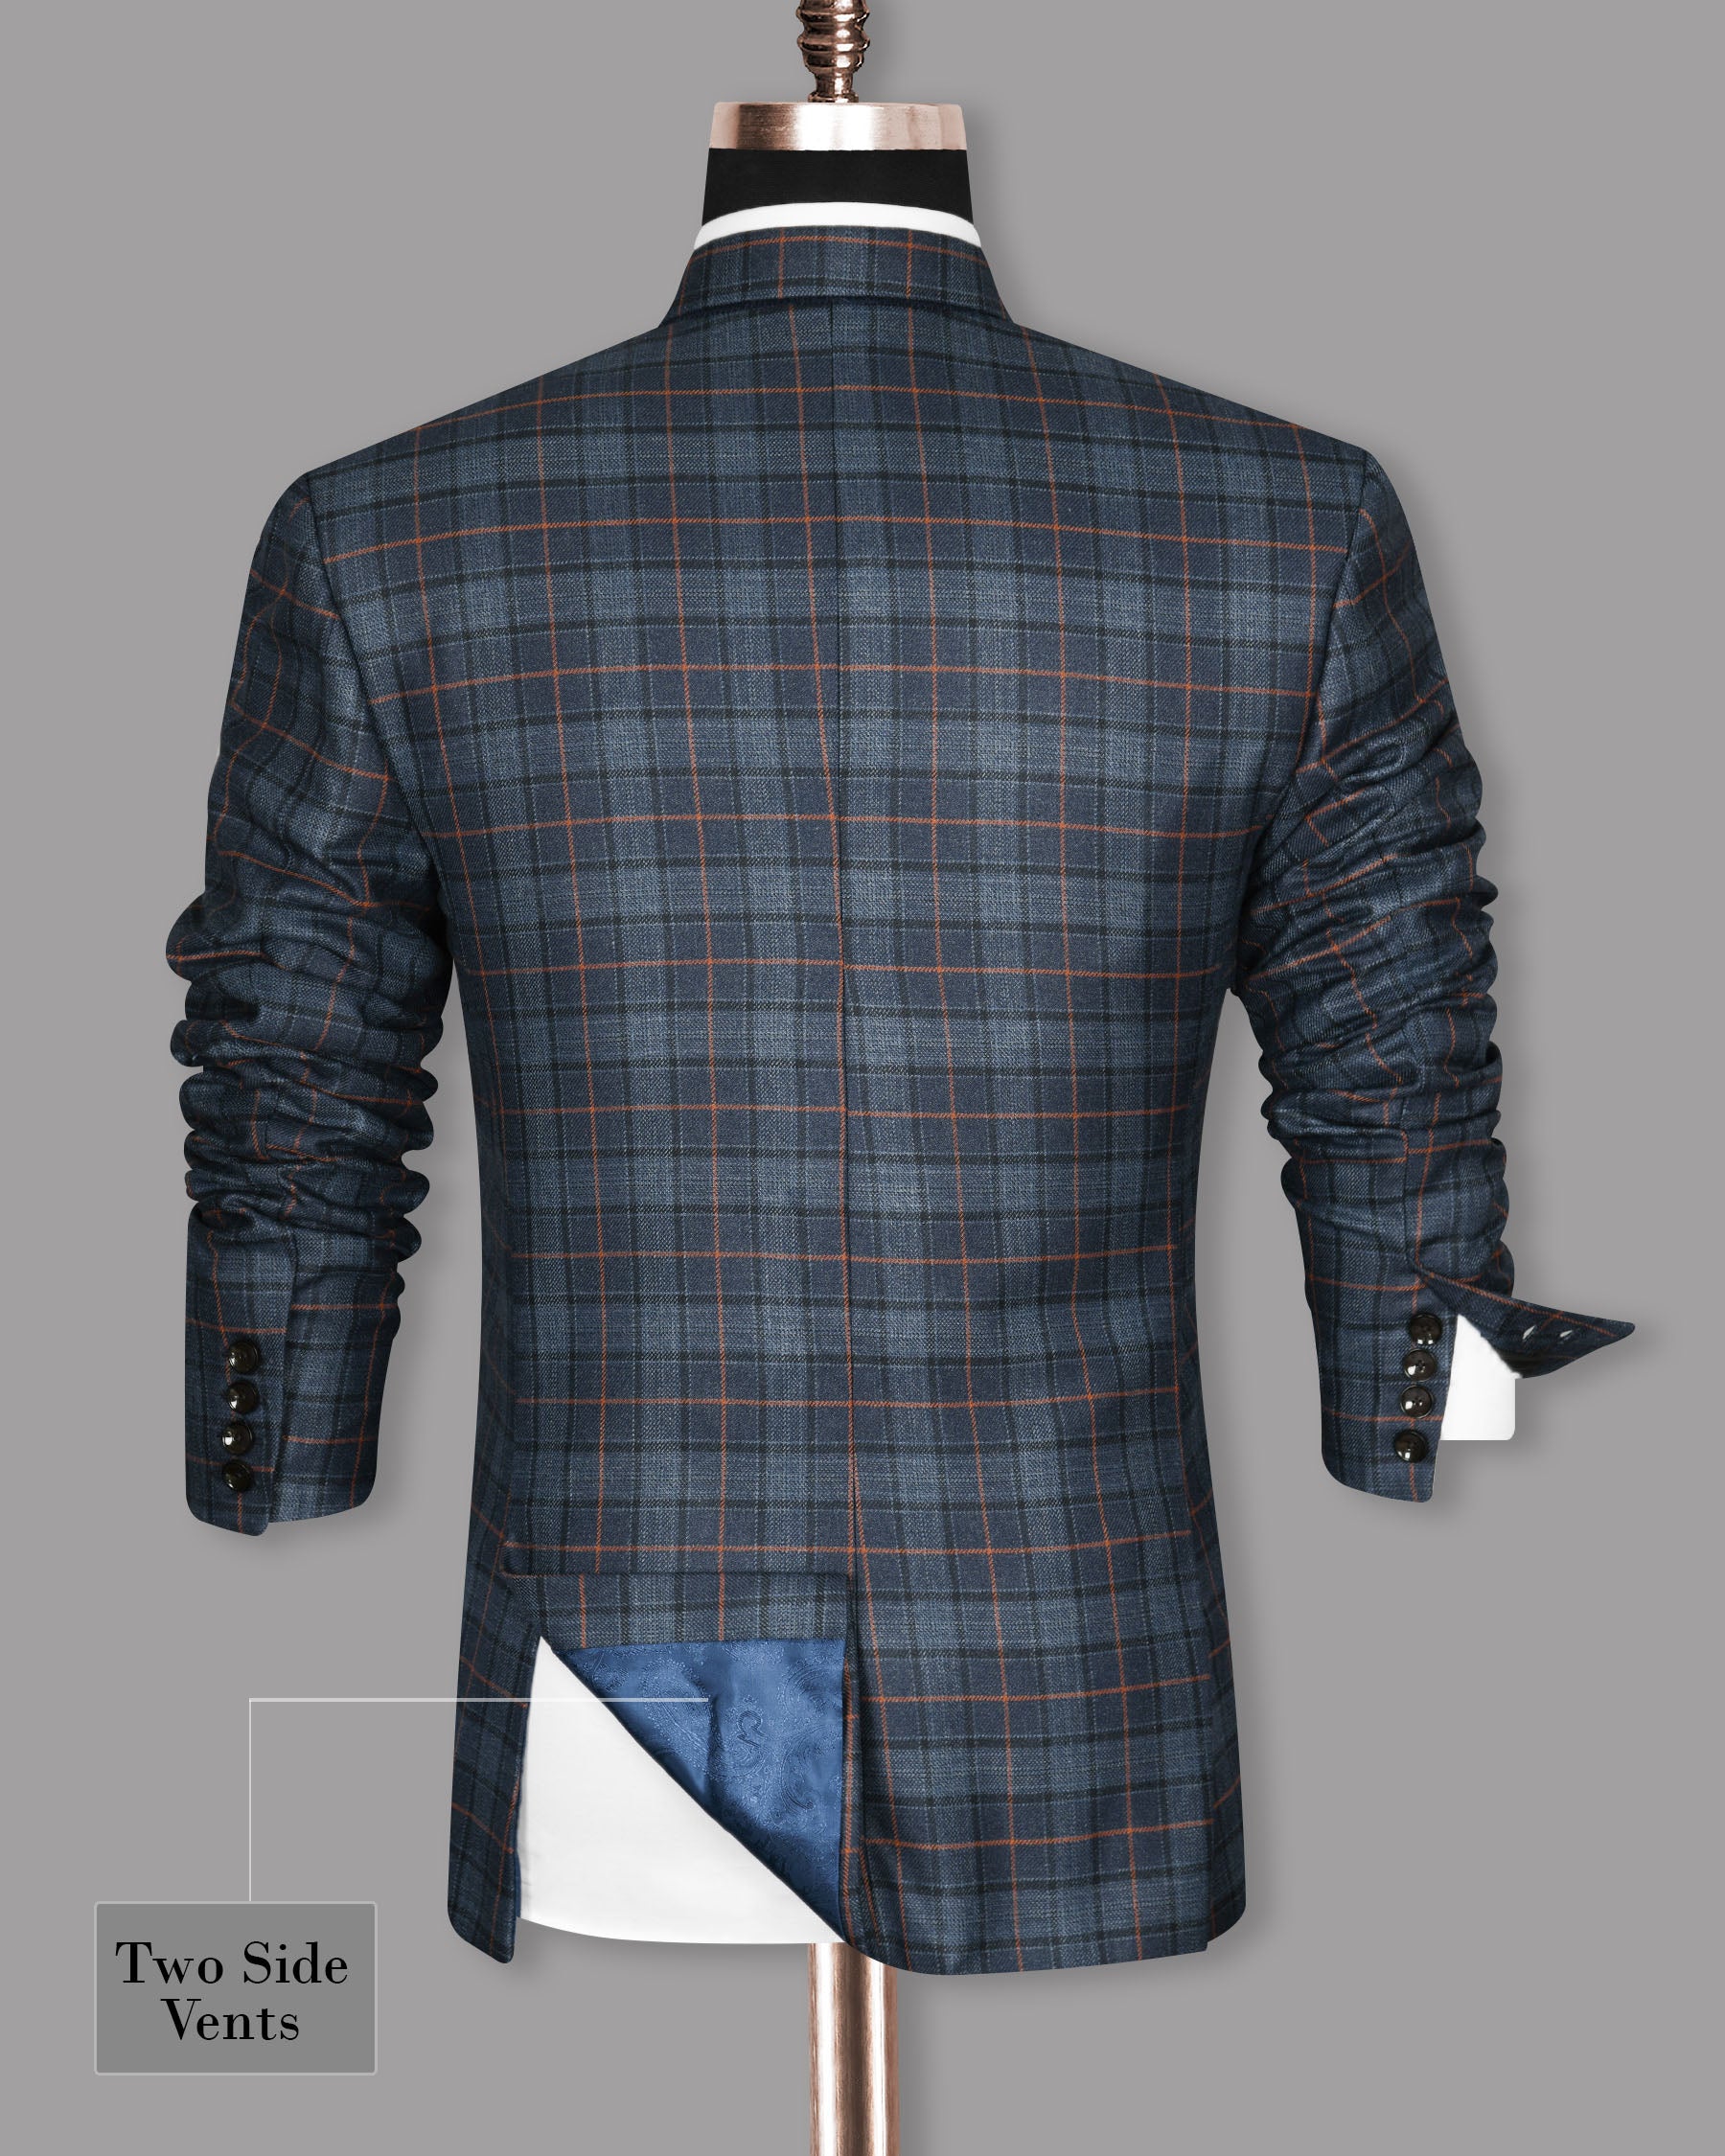 Charade Gray Plaid Double Breasted Suit